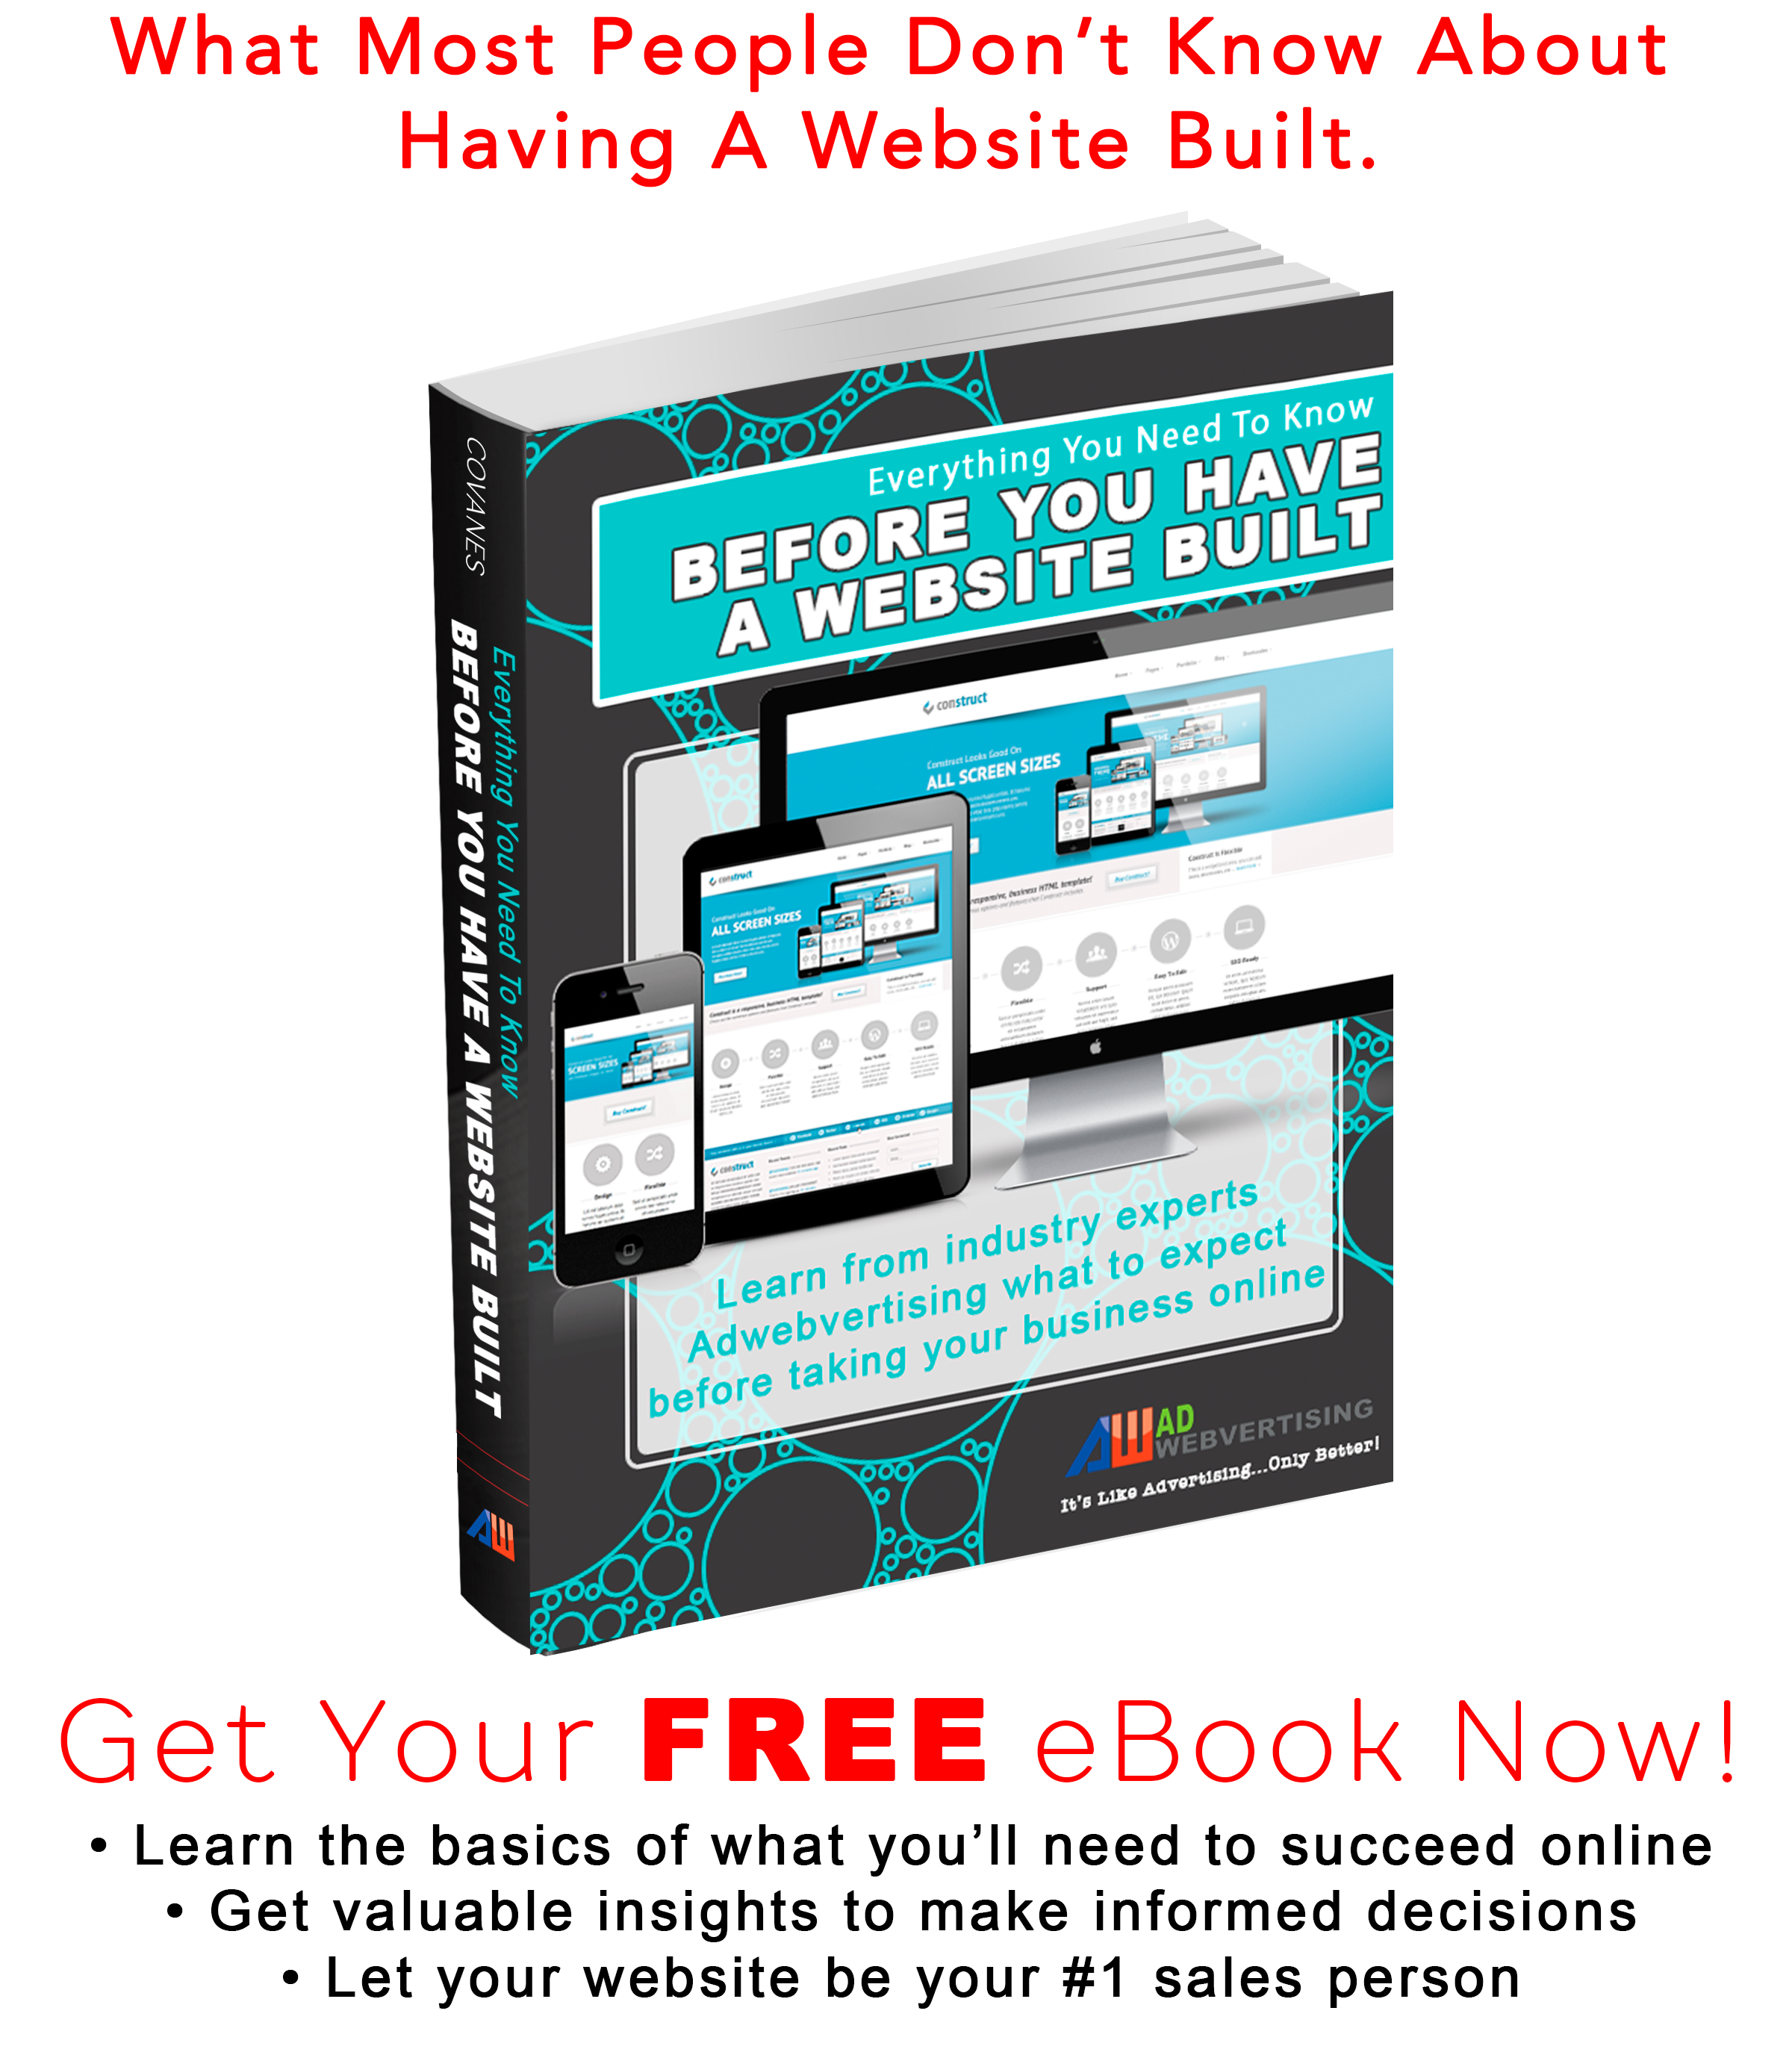 Everything You Need to Know Before You Have Your Website Built